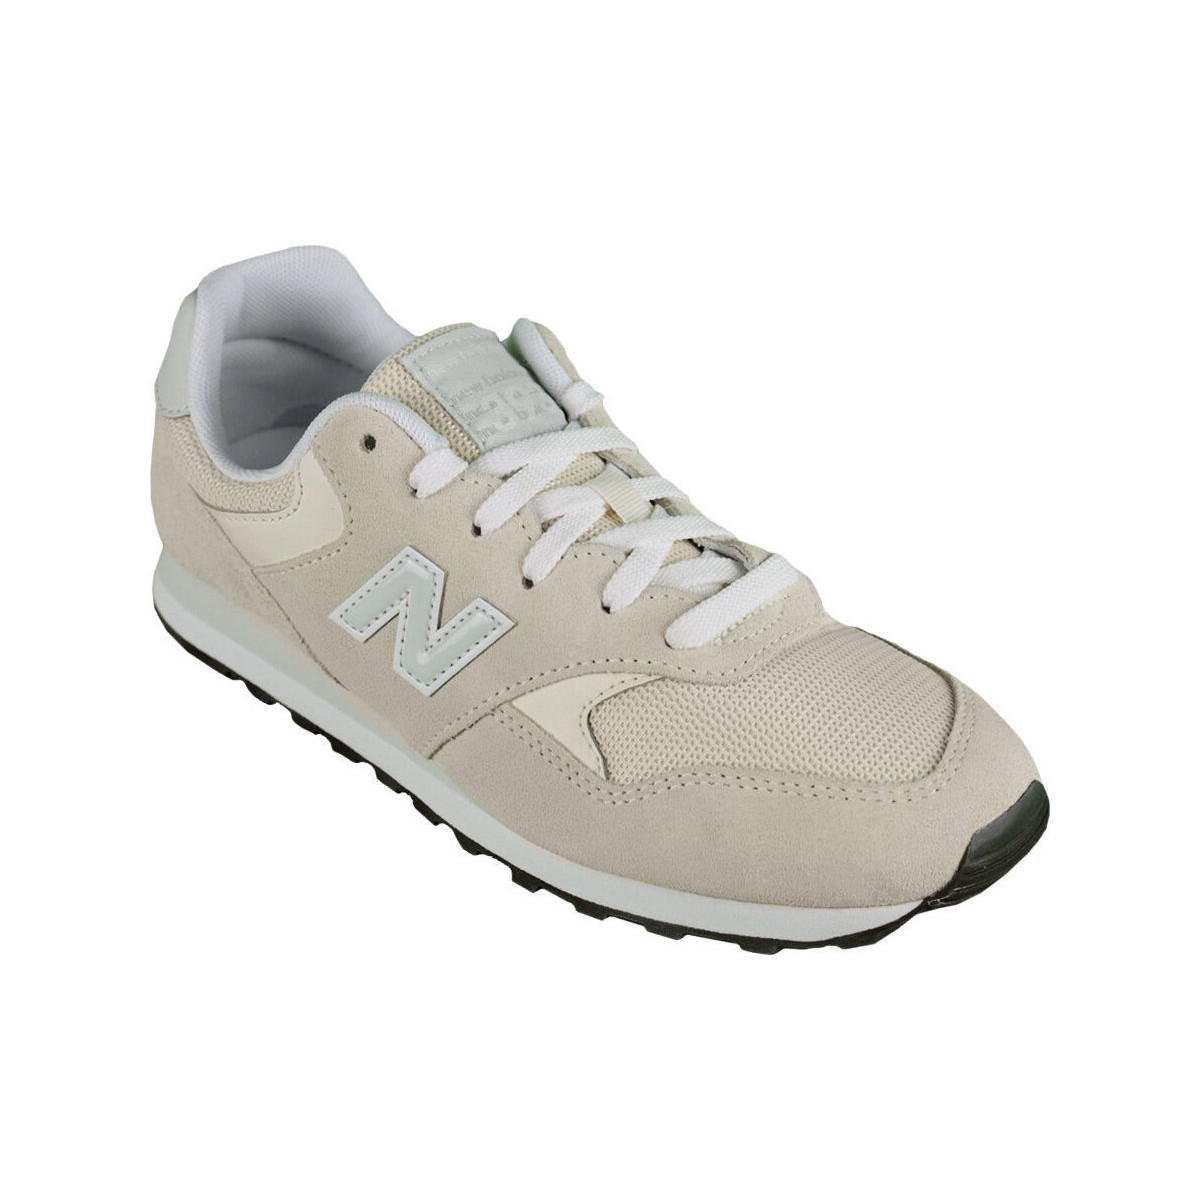 Chaussures Femme New Balance Dresses up Its 550 in Burgundy & Blue Accents wl393ca1 Beige